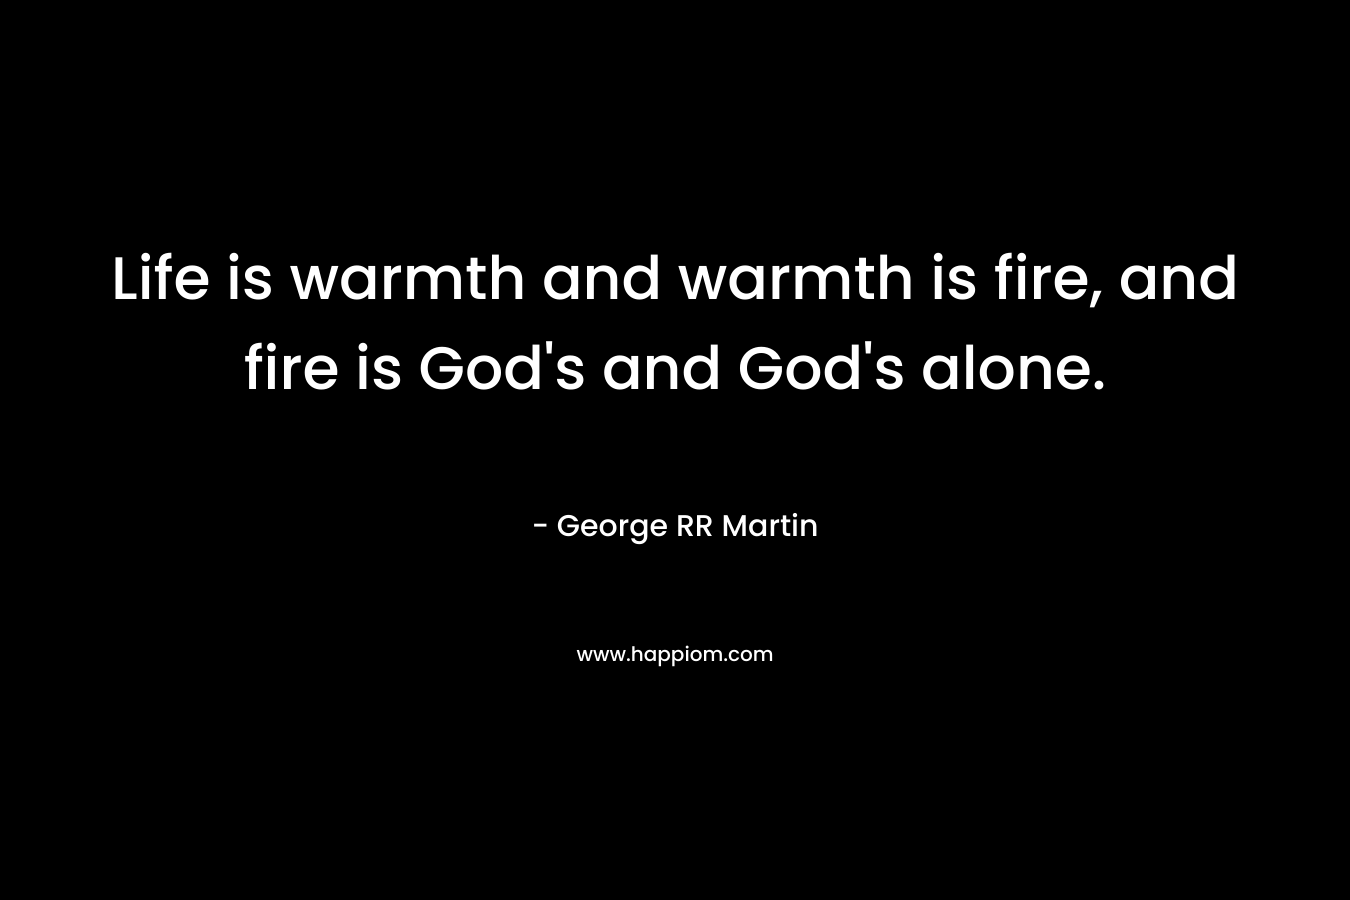 Life is warmth and warmth is fire, and fire is God's and God's alone.